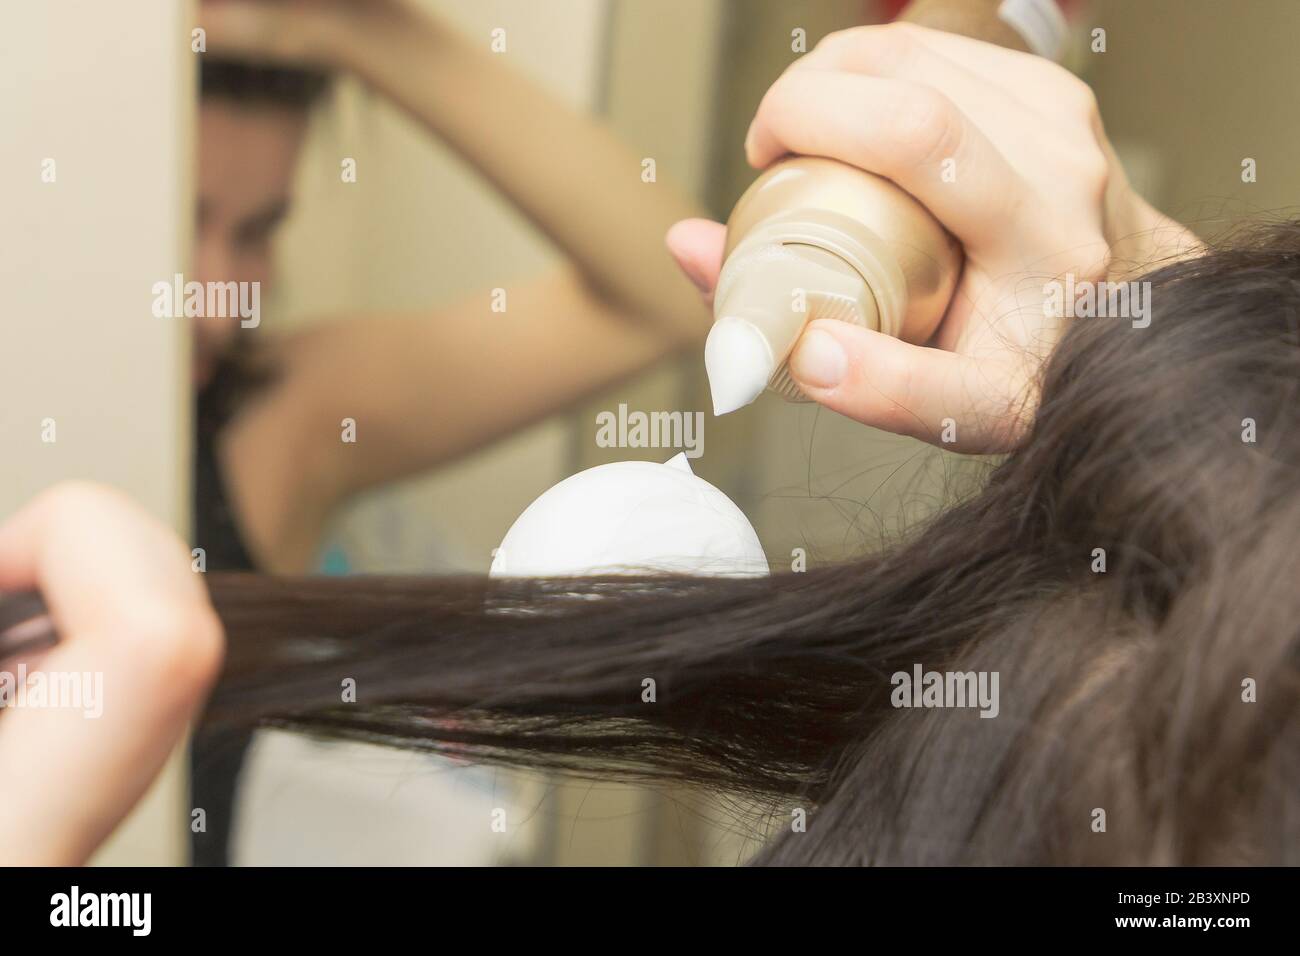 Young women is styling her hair with a foam or mousse. Styling mousse on  the brown long straight hair Stock Photo - Alamy